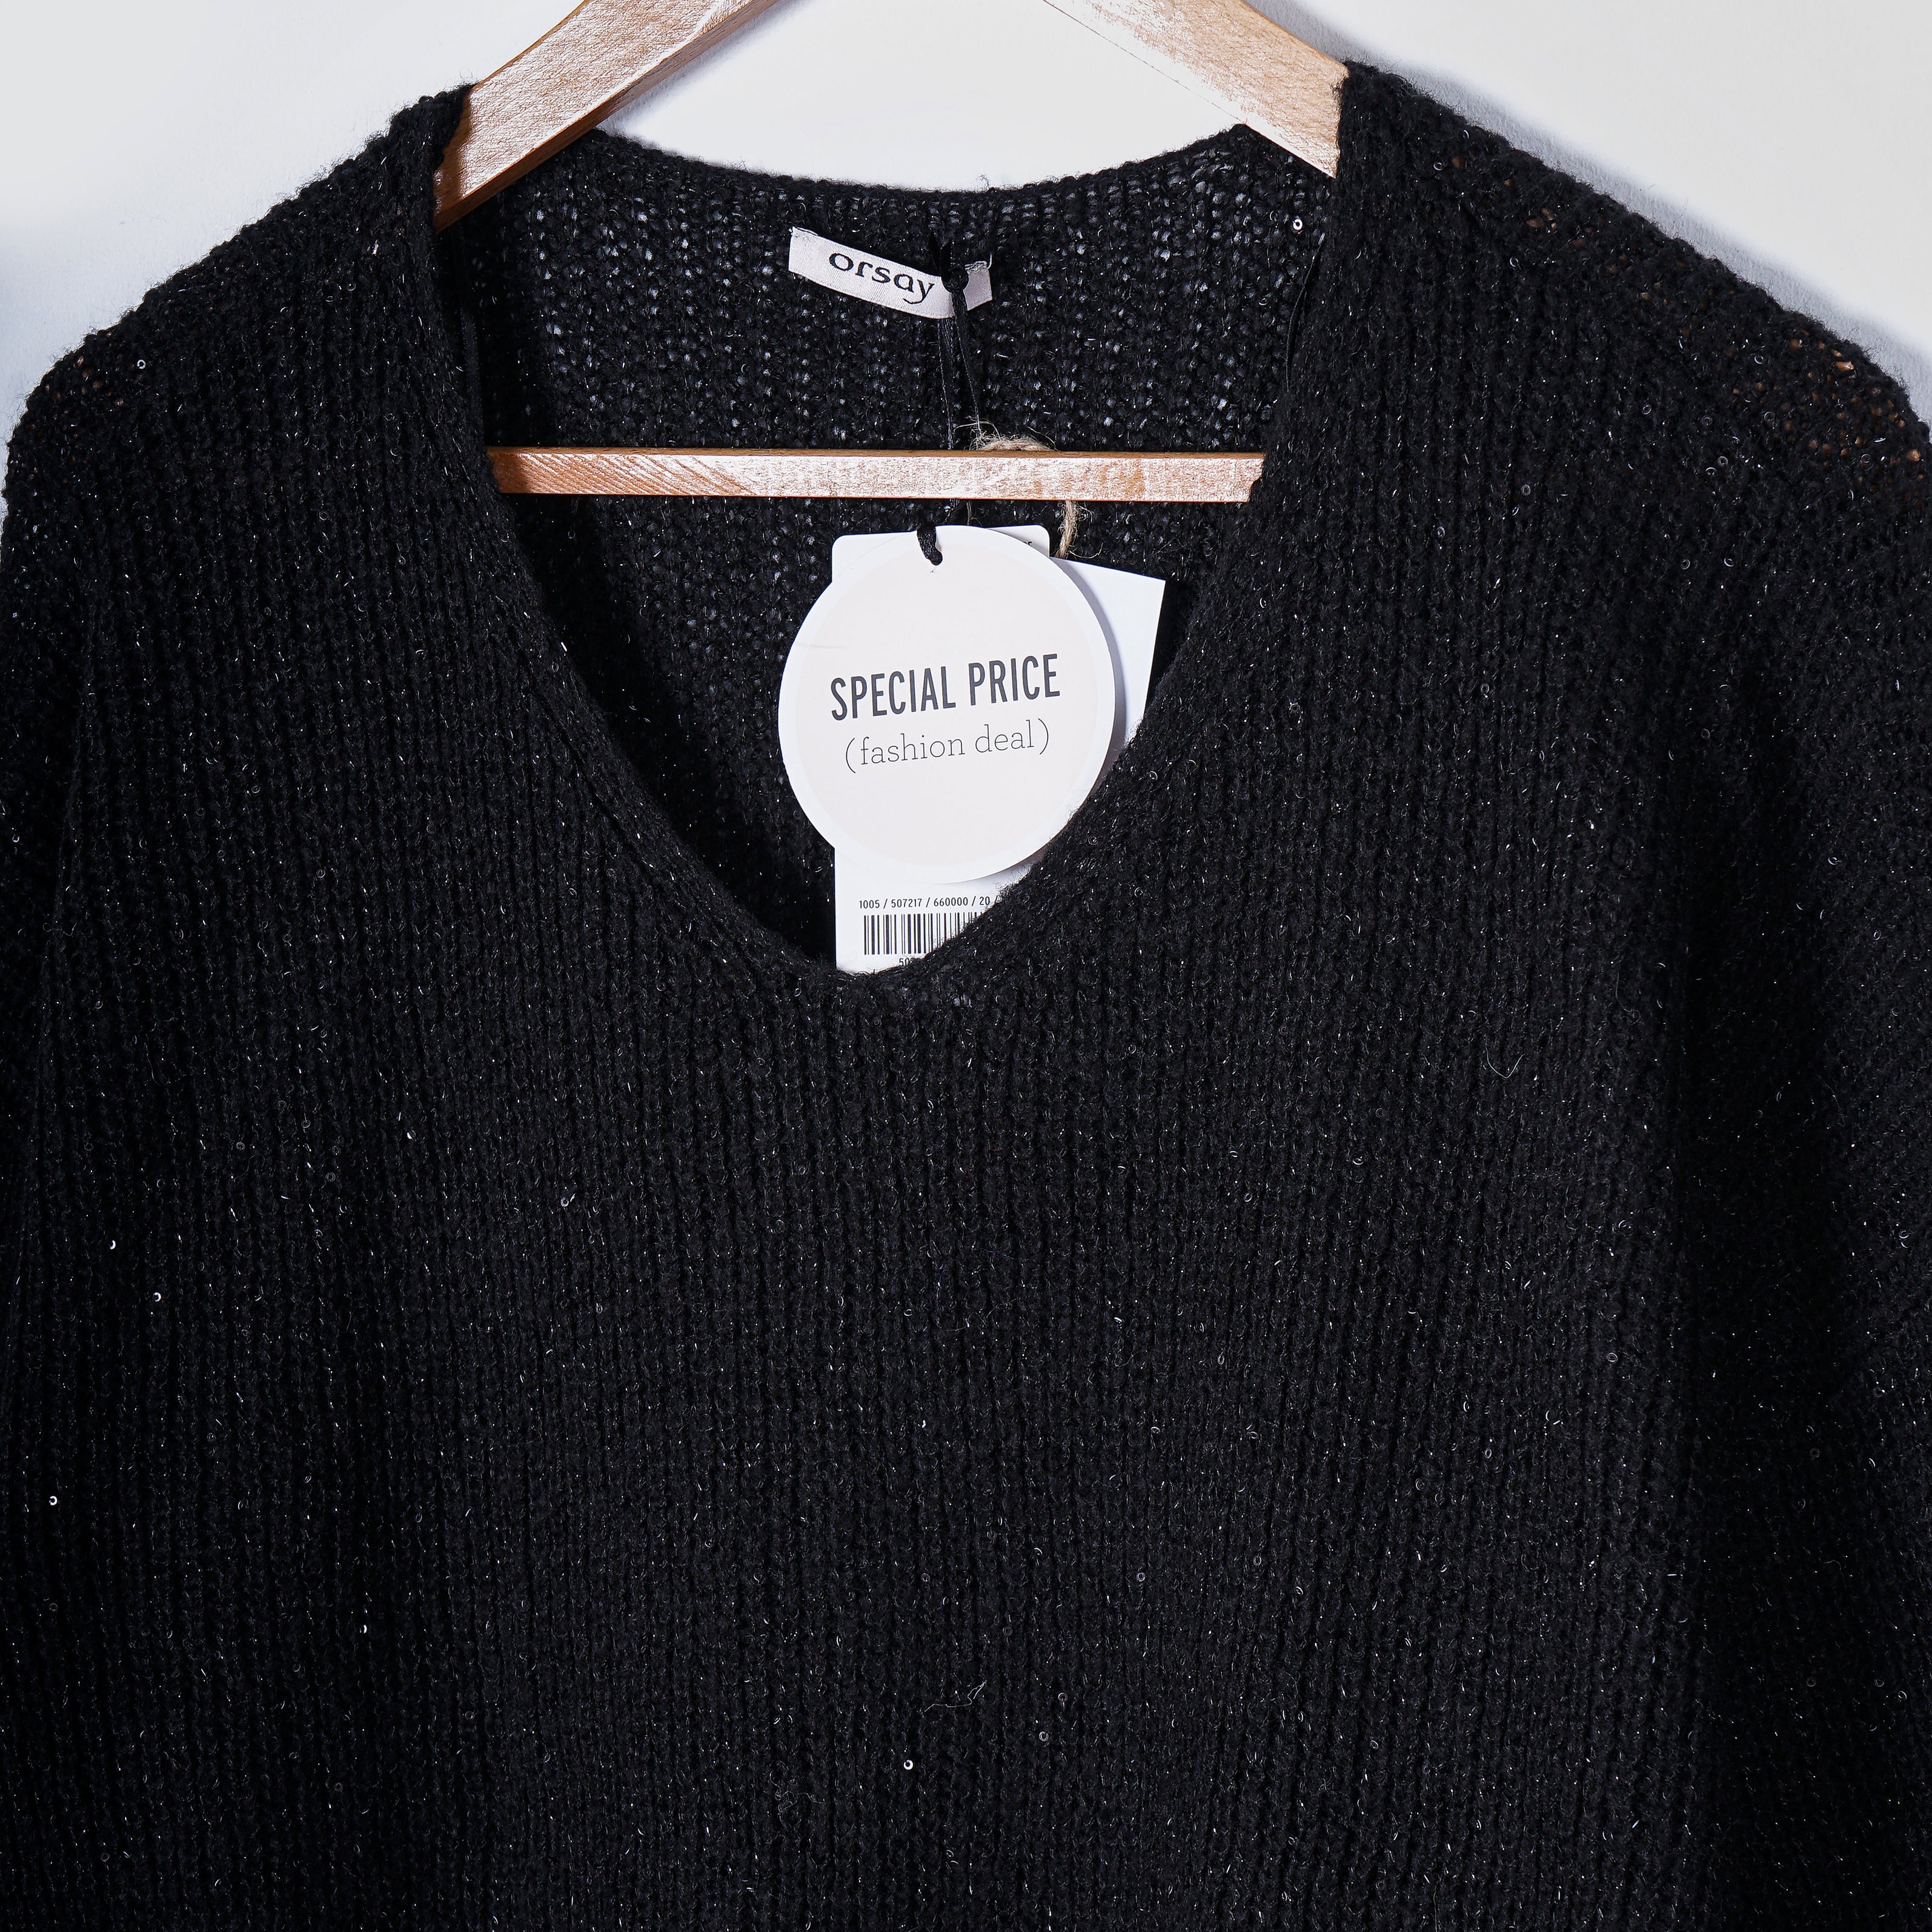 Orsay Knitted Black Sweater - Marca Deals - Orsay